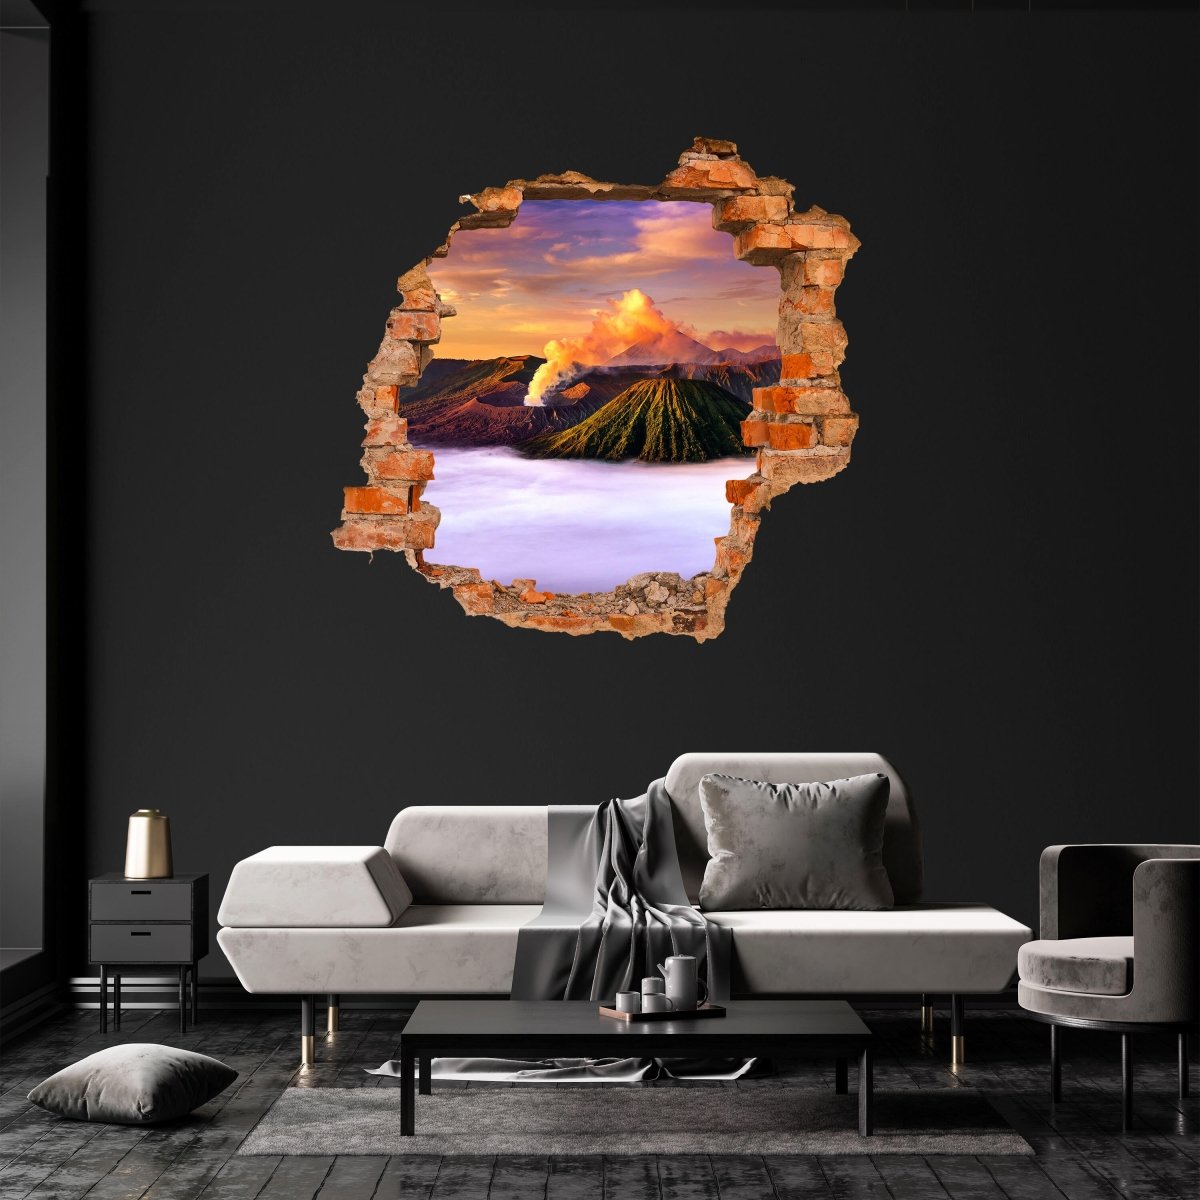 3D wall sticker volcano shrouded in clouds, mountains, cloud - Wall Decal M1309